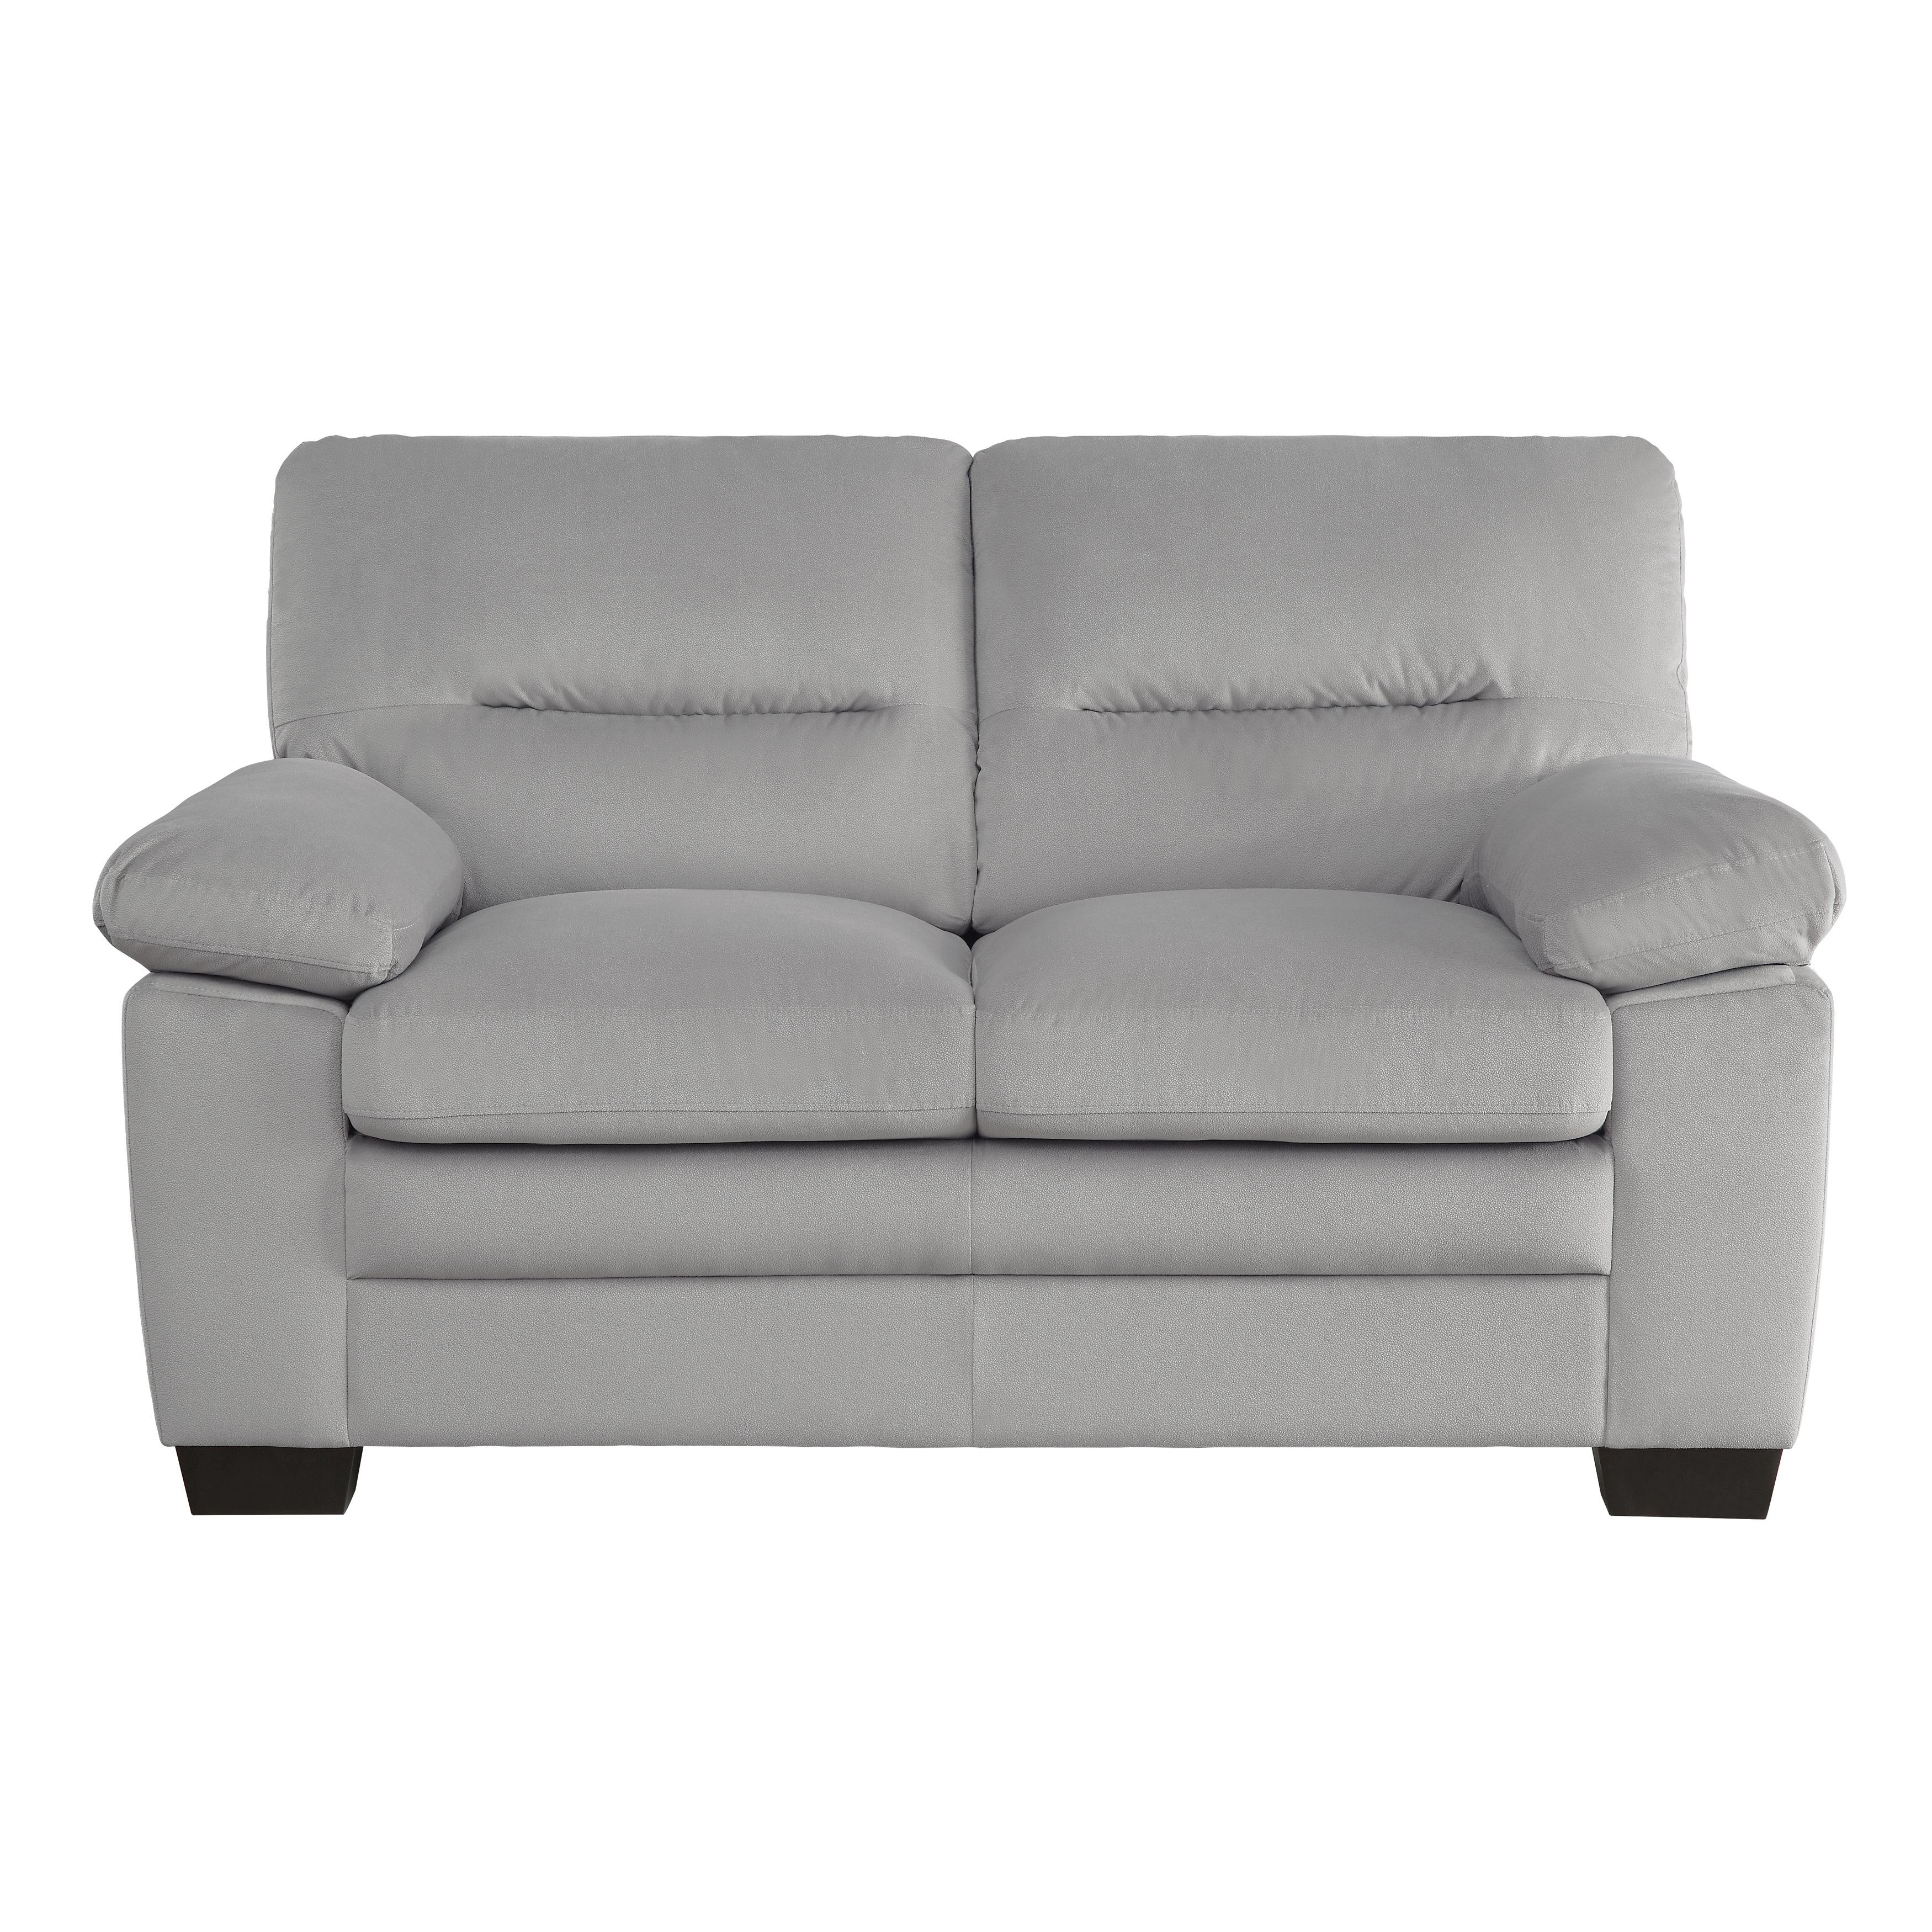 Modern Loveseat 9328GY-2 Keighly 9328GY-2 in Gray 